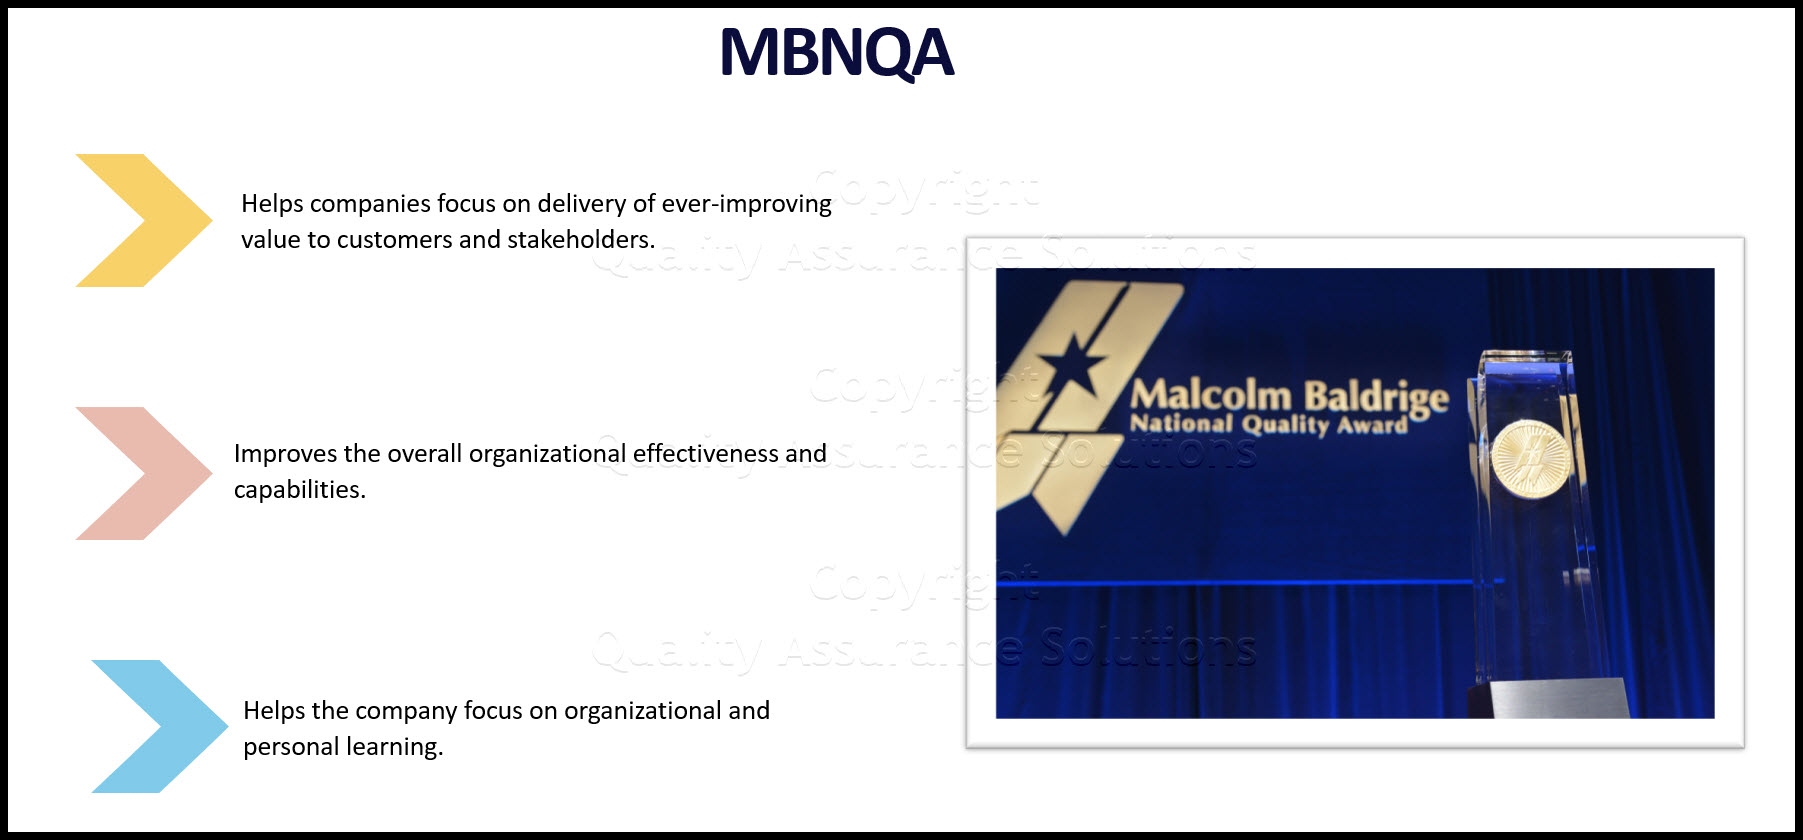 Malcolm Baldrige National Quality Award is criteria designed to help organizations use an integrated approach to organizational performance management 